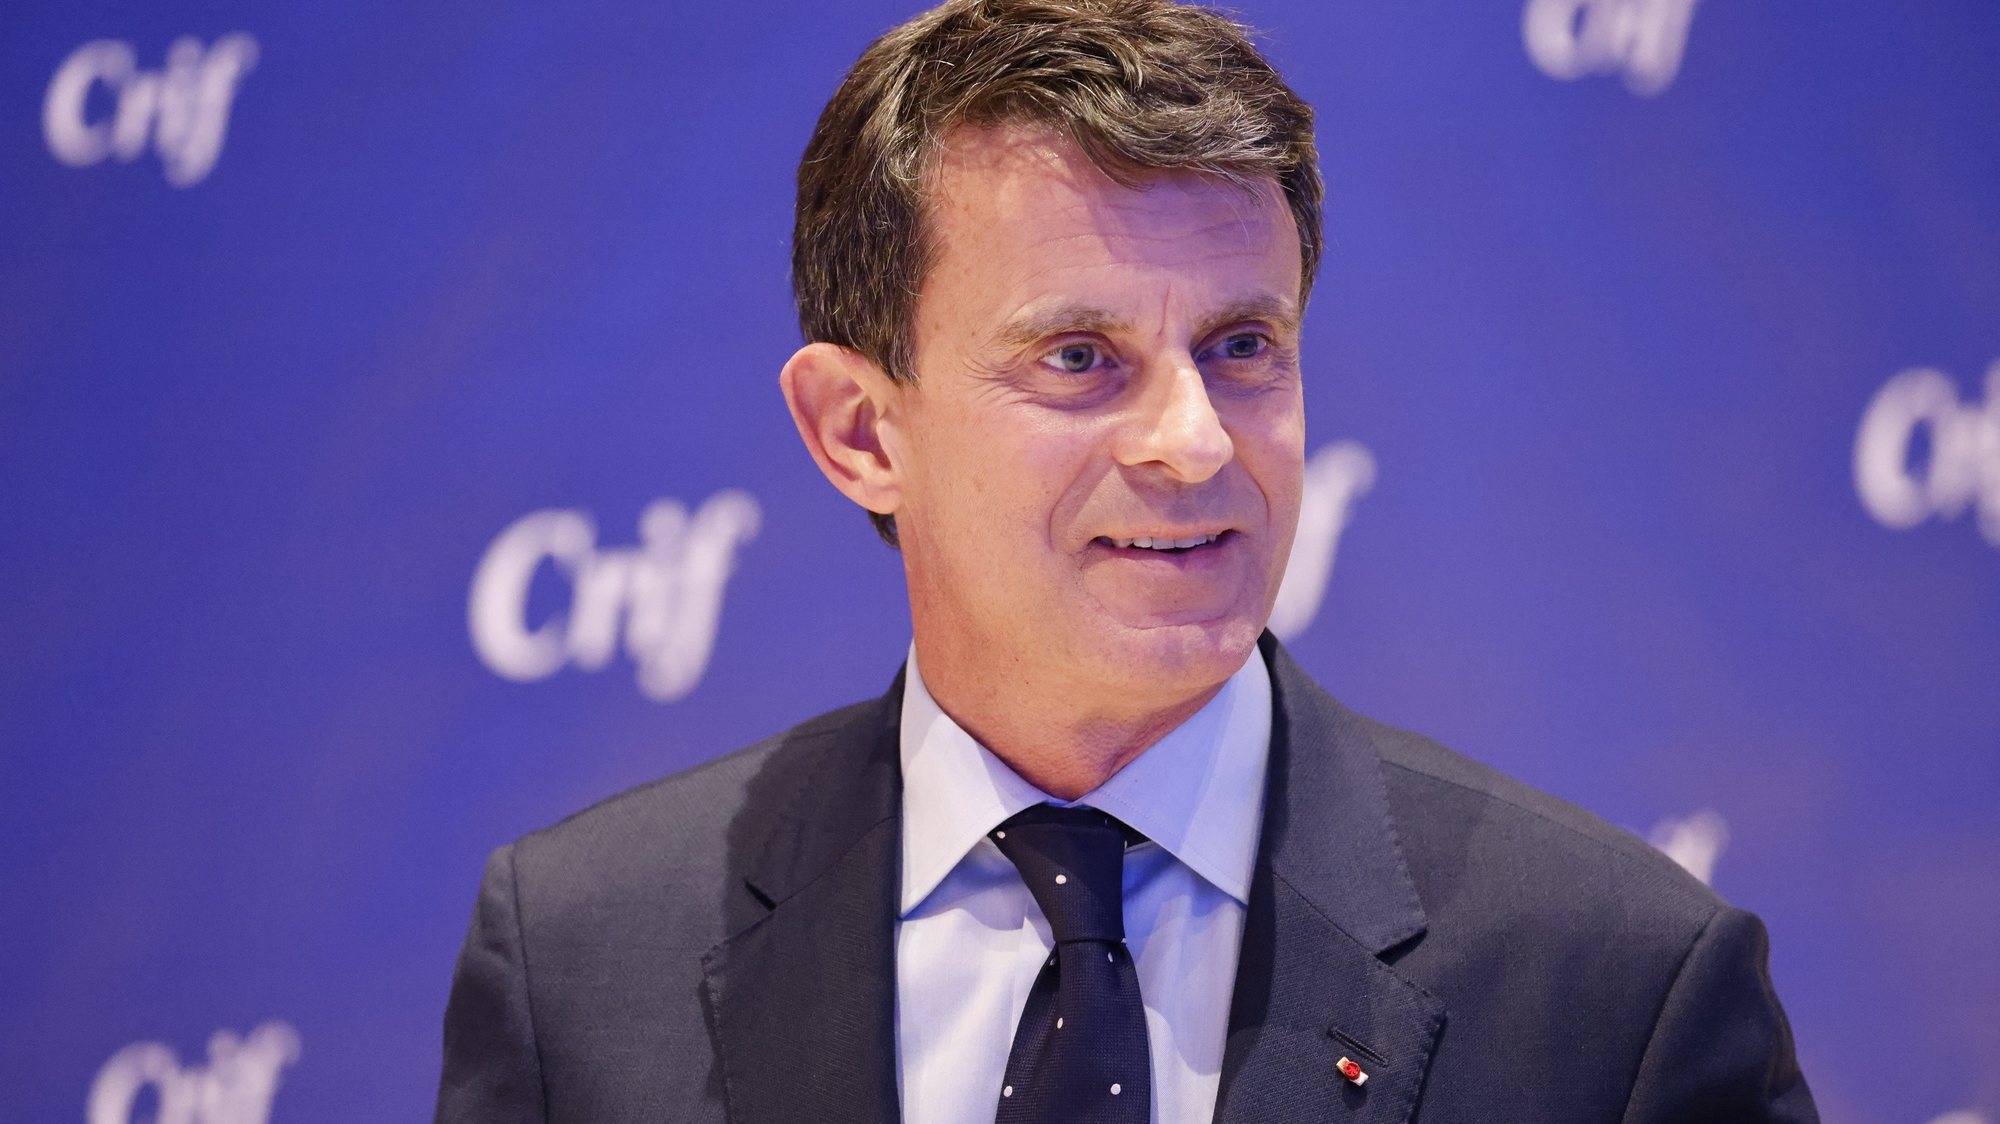 epa09782400 Former French prime minister Manuel Valls arrives for the dinner of the Council of French Jewish Institutions (CRIF) in Paris, France, on 24 February 2022.  EPA/LUDOVIC MARIN / POOL  MAXPPP OUT